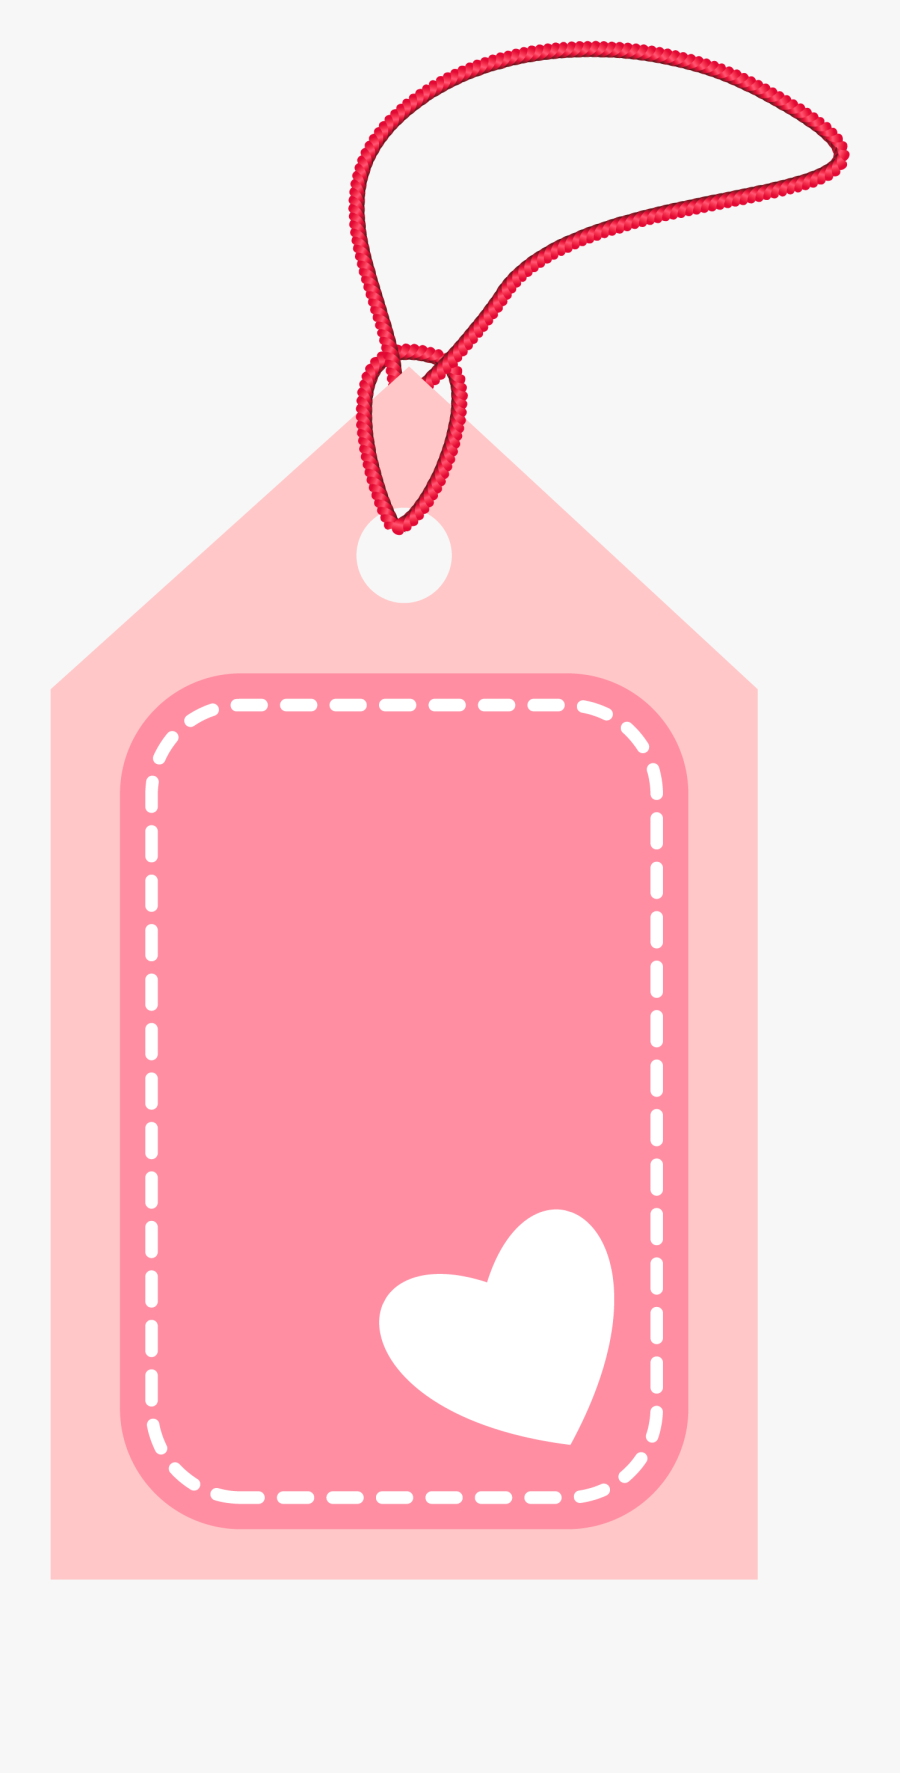 Love Valentines, Valentine Crafts, Printable Tags, - Facebook Tag Pictures Love, Transparent Clipart